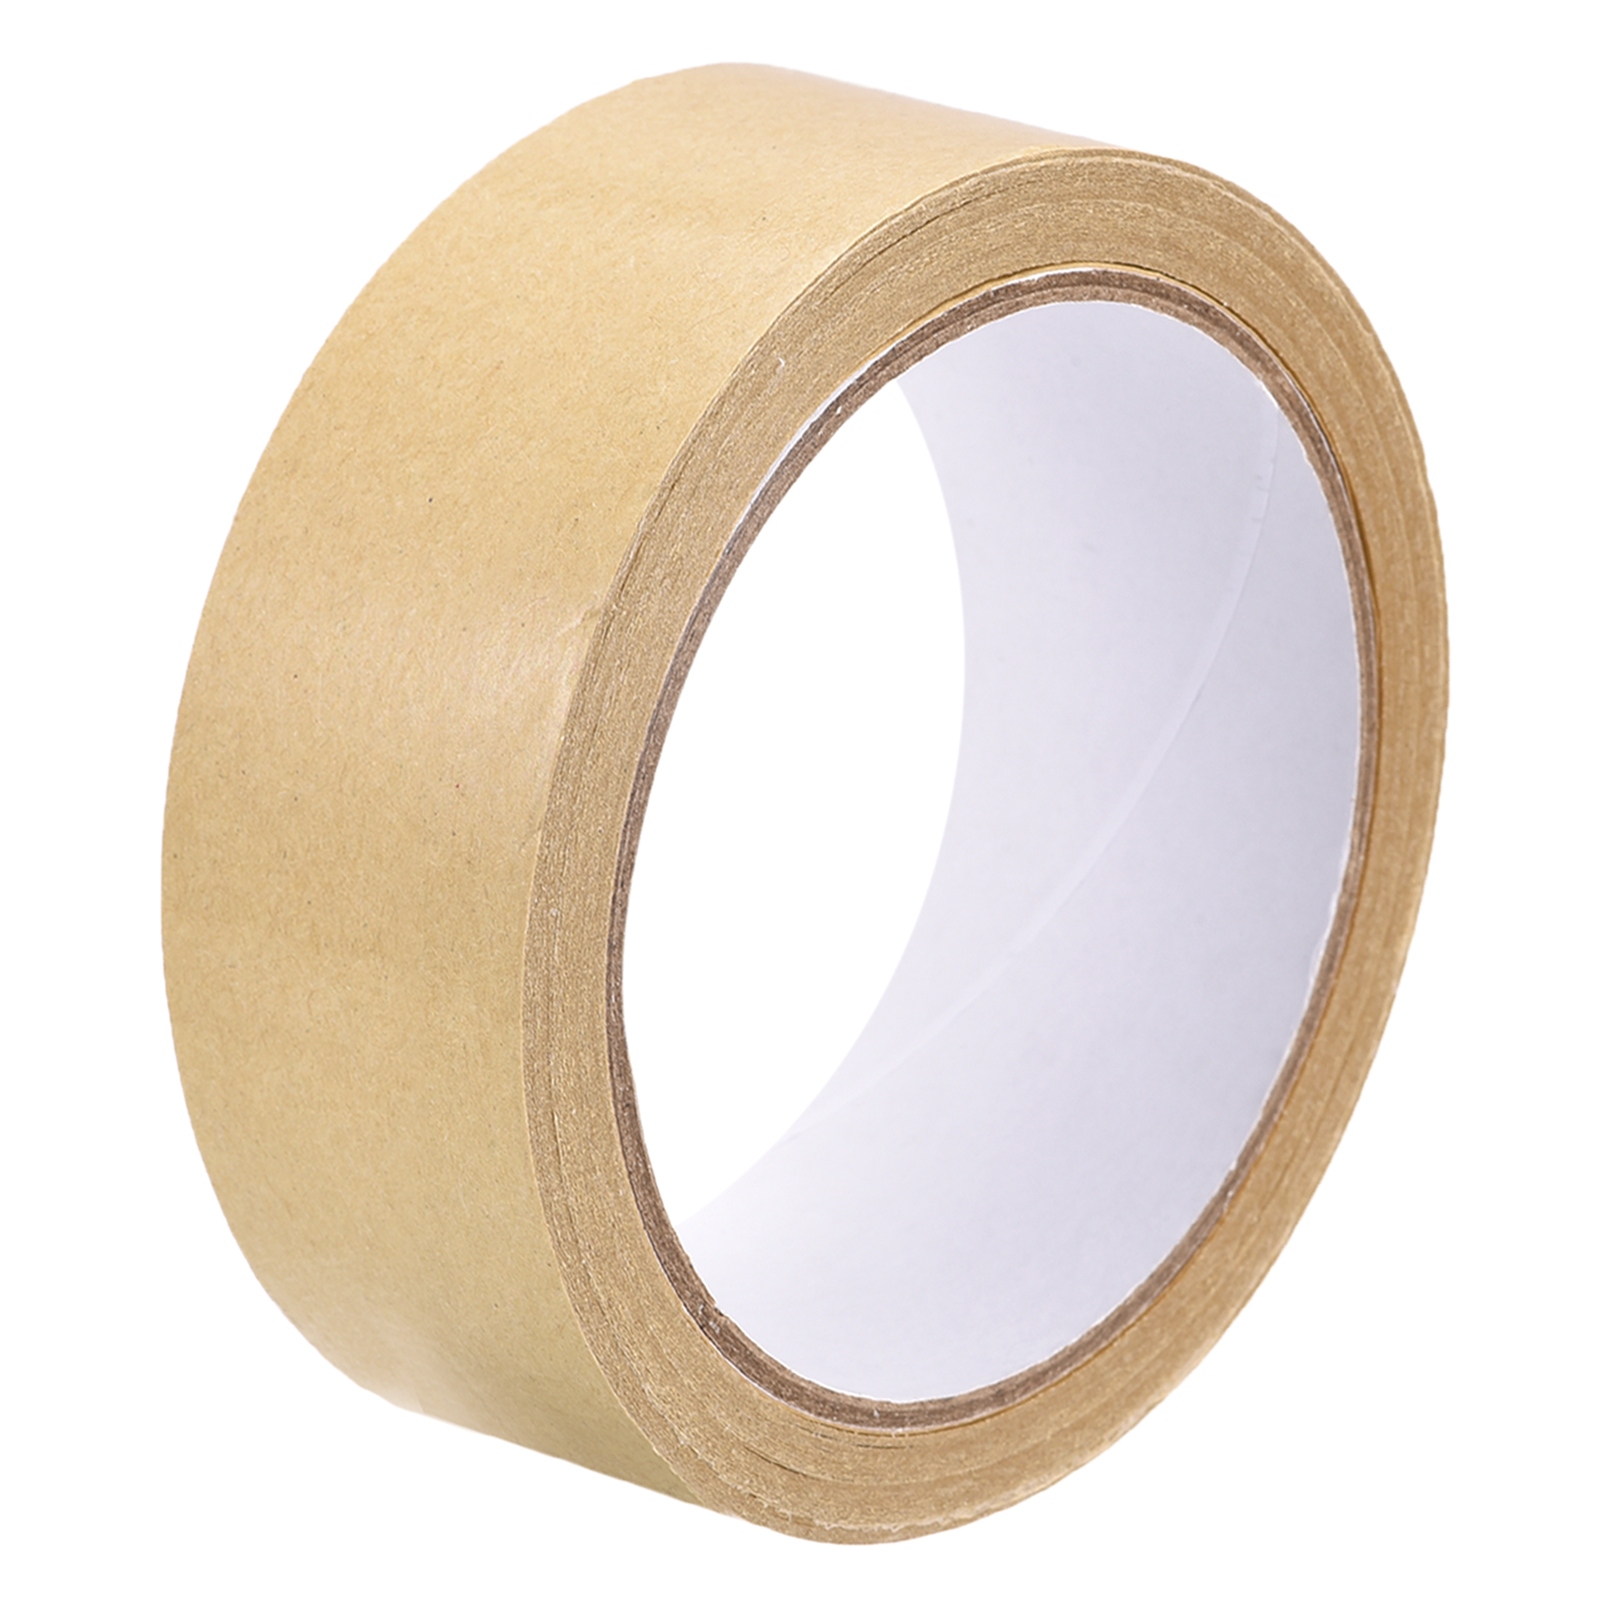 3pcs Brown Paper Tape 22 Yards x 1.2 inch Self Adhesive Packaging Tape - 1.2 inch